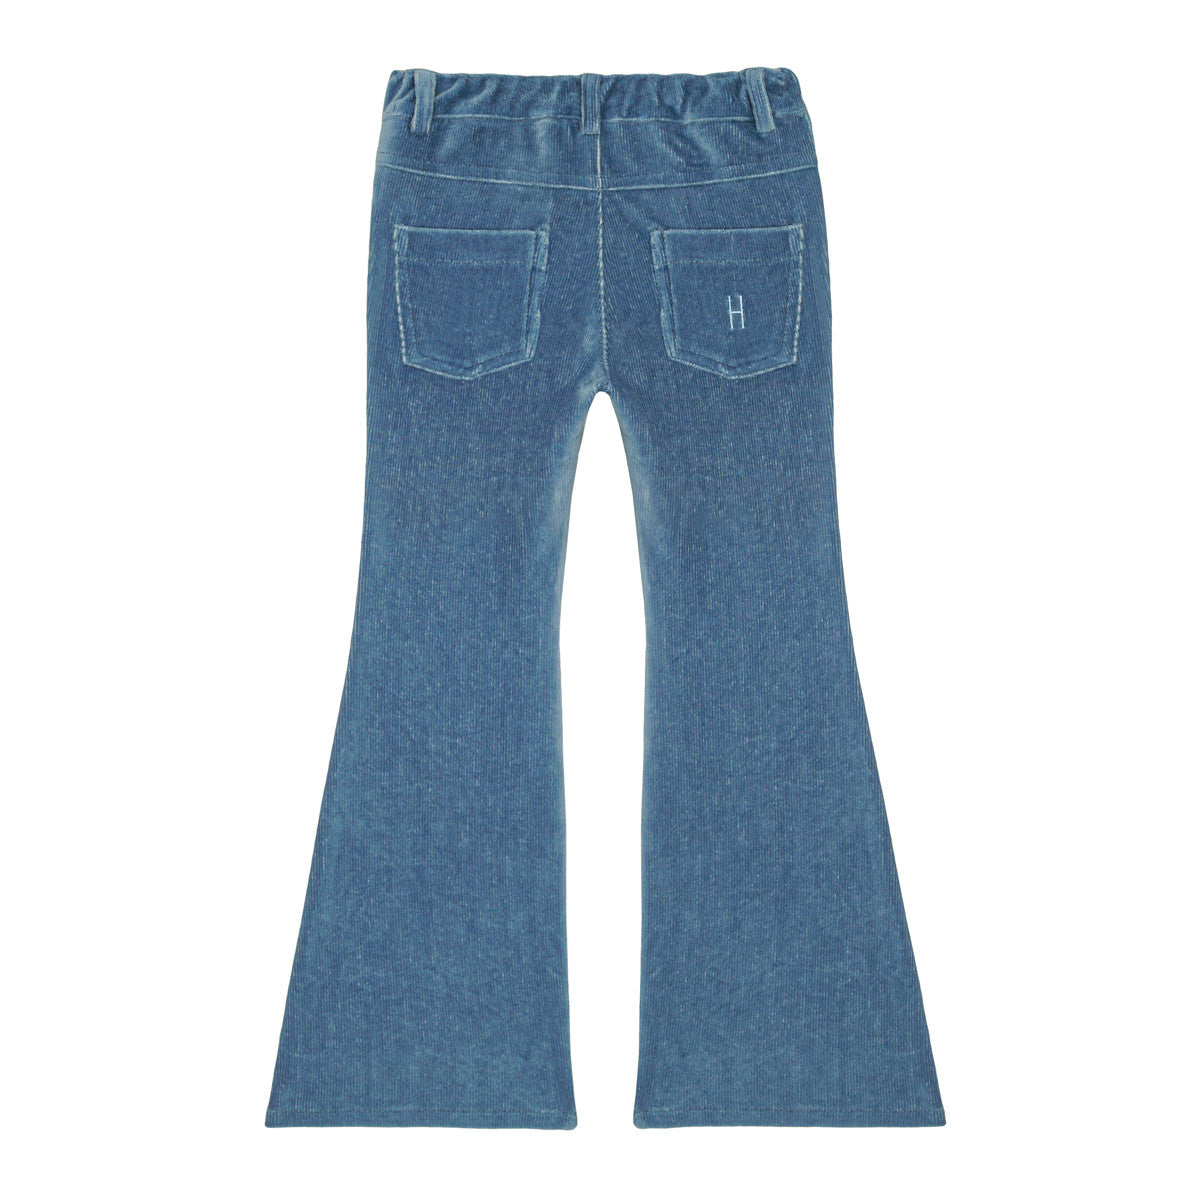 Little Hedonist 5-pocket flared pants in Blue Shadow, slim fit thighs, for boys and girls. Made from the softest organic fabric. Sustainable unisex kids clothing.